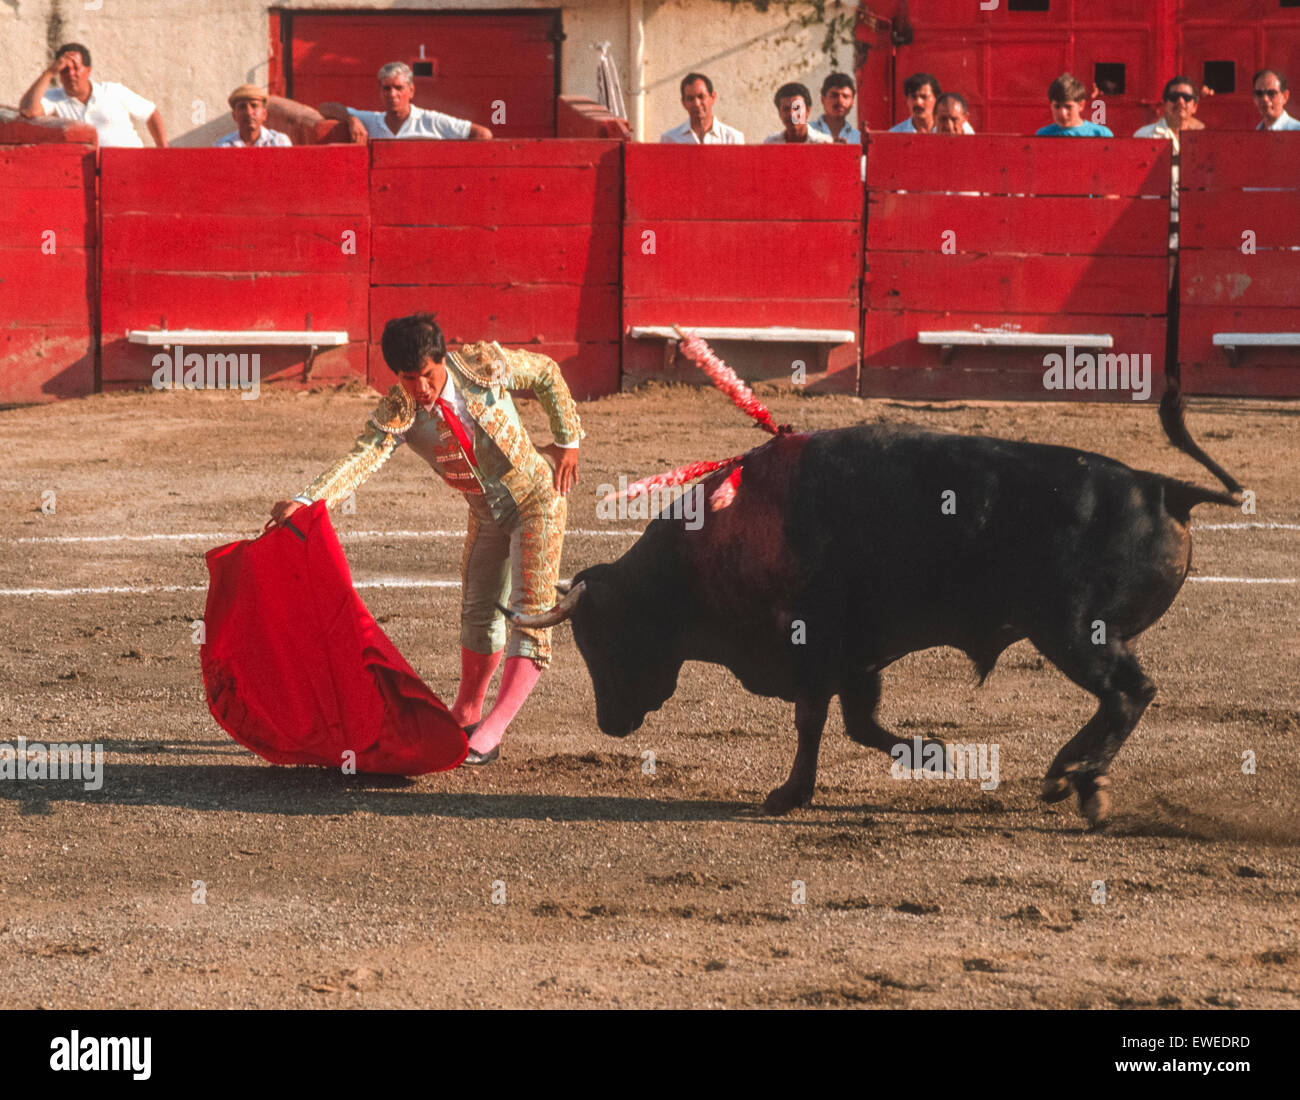 CARACAS, VENEZUELA - Matador waves red cape in front of charging bull during bullfight in arena. 1988 Stock Photo